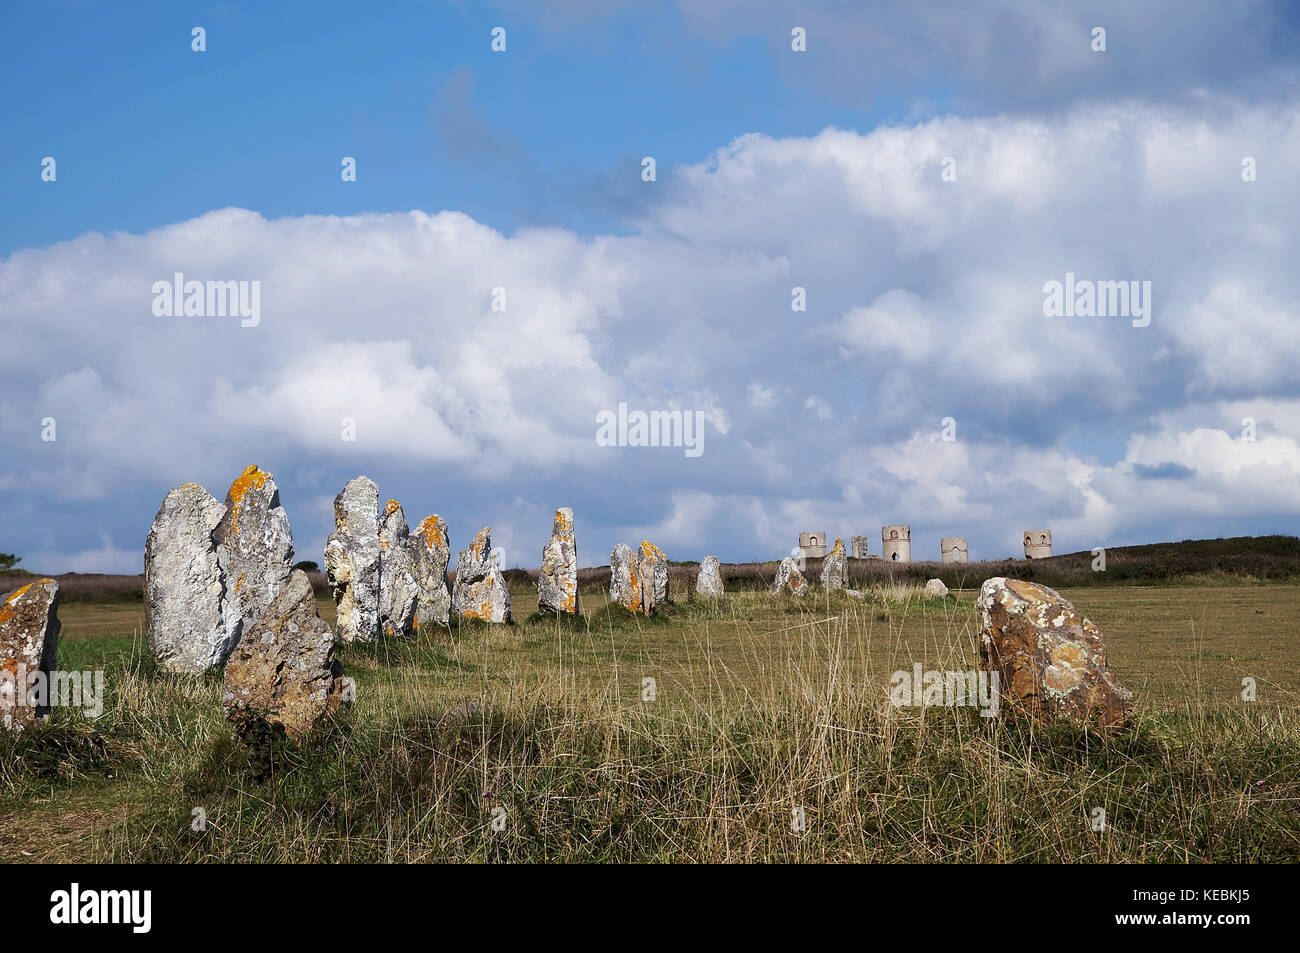 Alignment of Lagatjar megaliths in field with stone tower in background, in Camaret-sur-mer (France-Brittany). Stock Photo